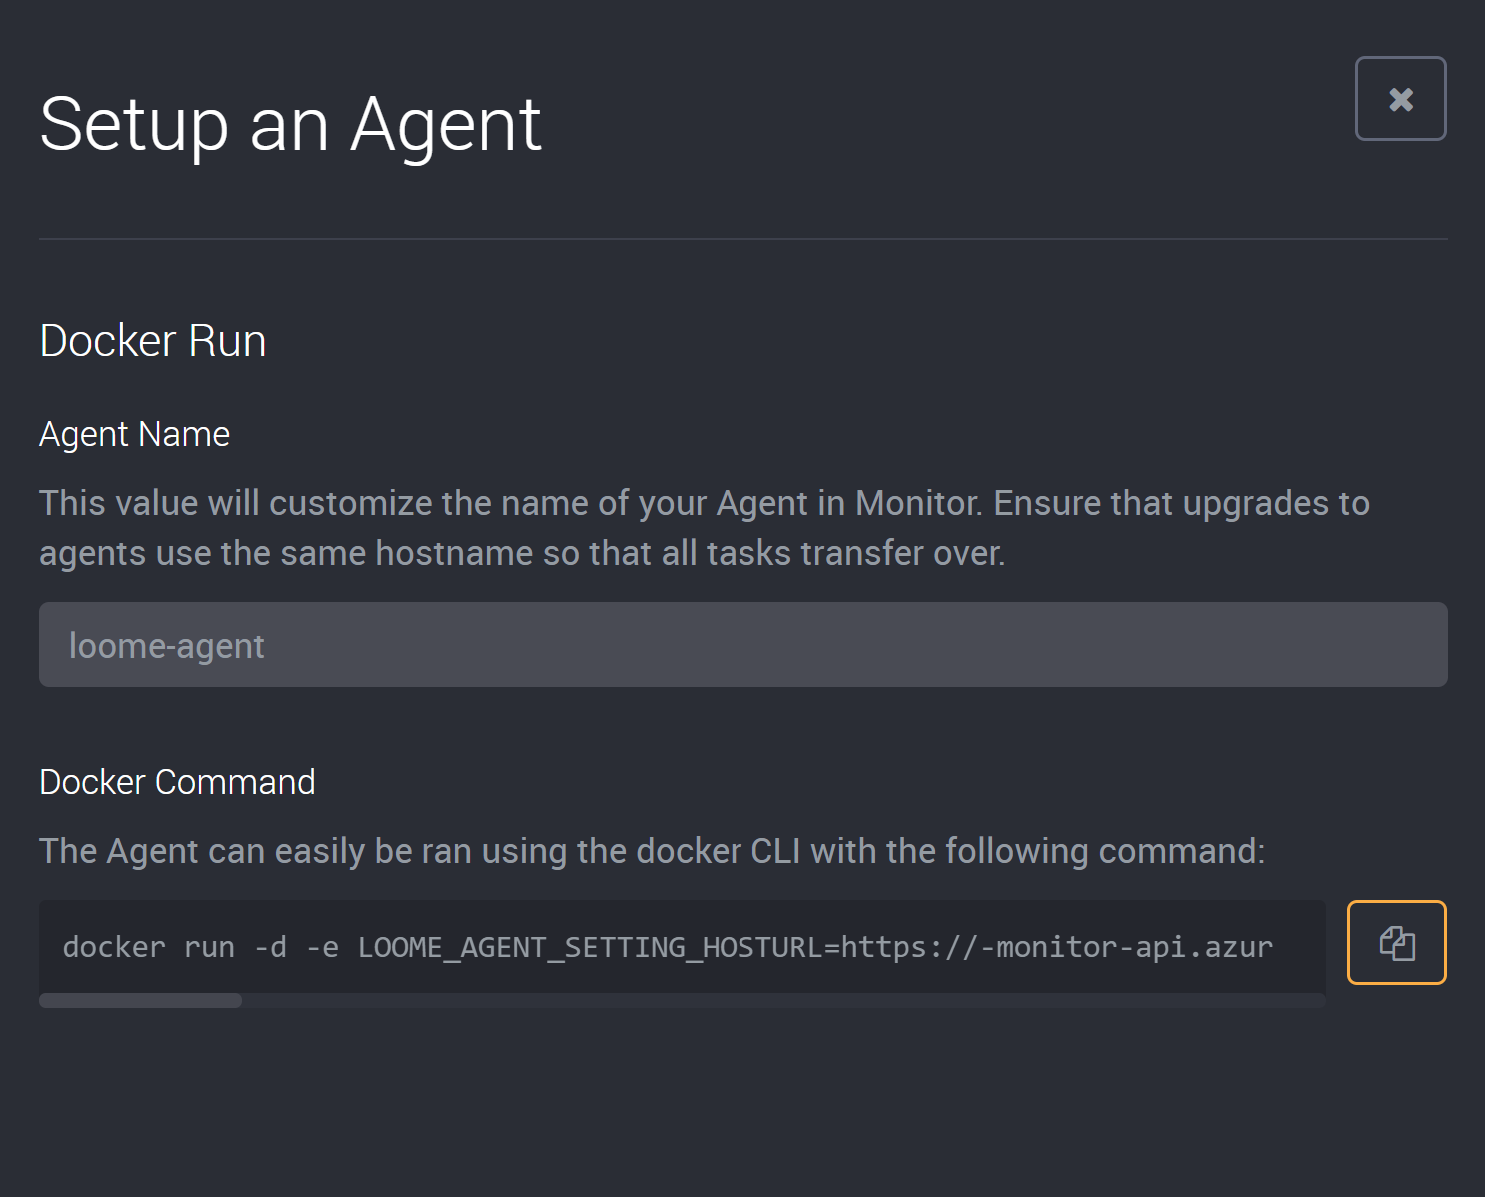 Installing the Agent as a Container